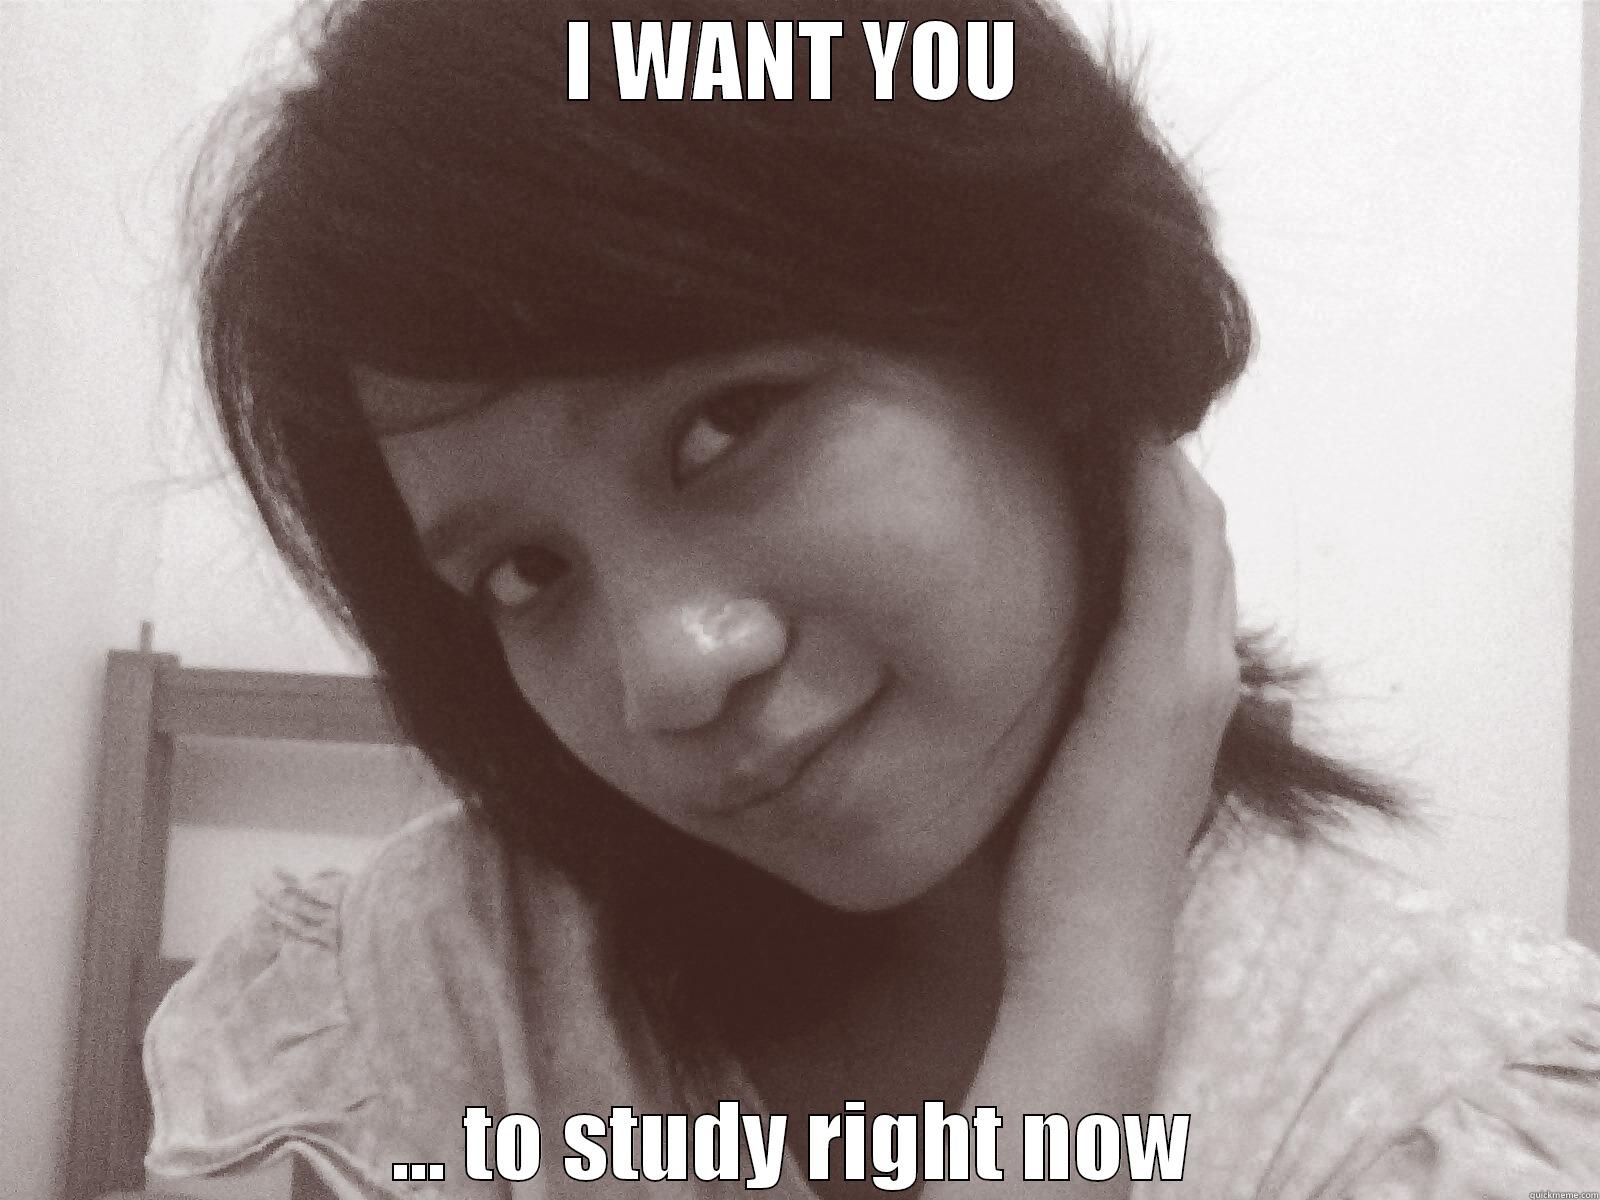 want u - I WANT YOU ... TO STUDY RIGHT NOW Misc